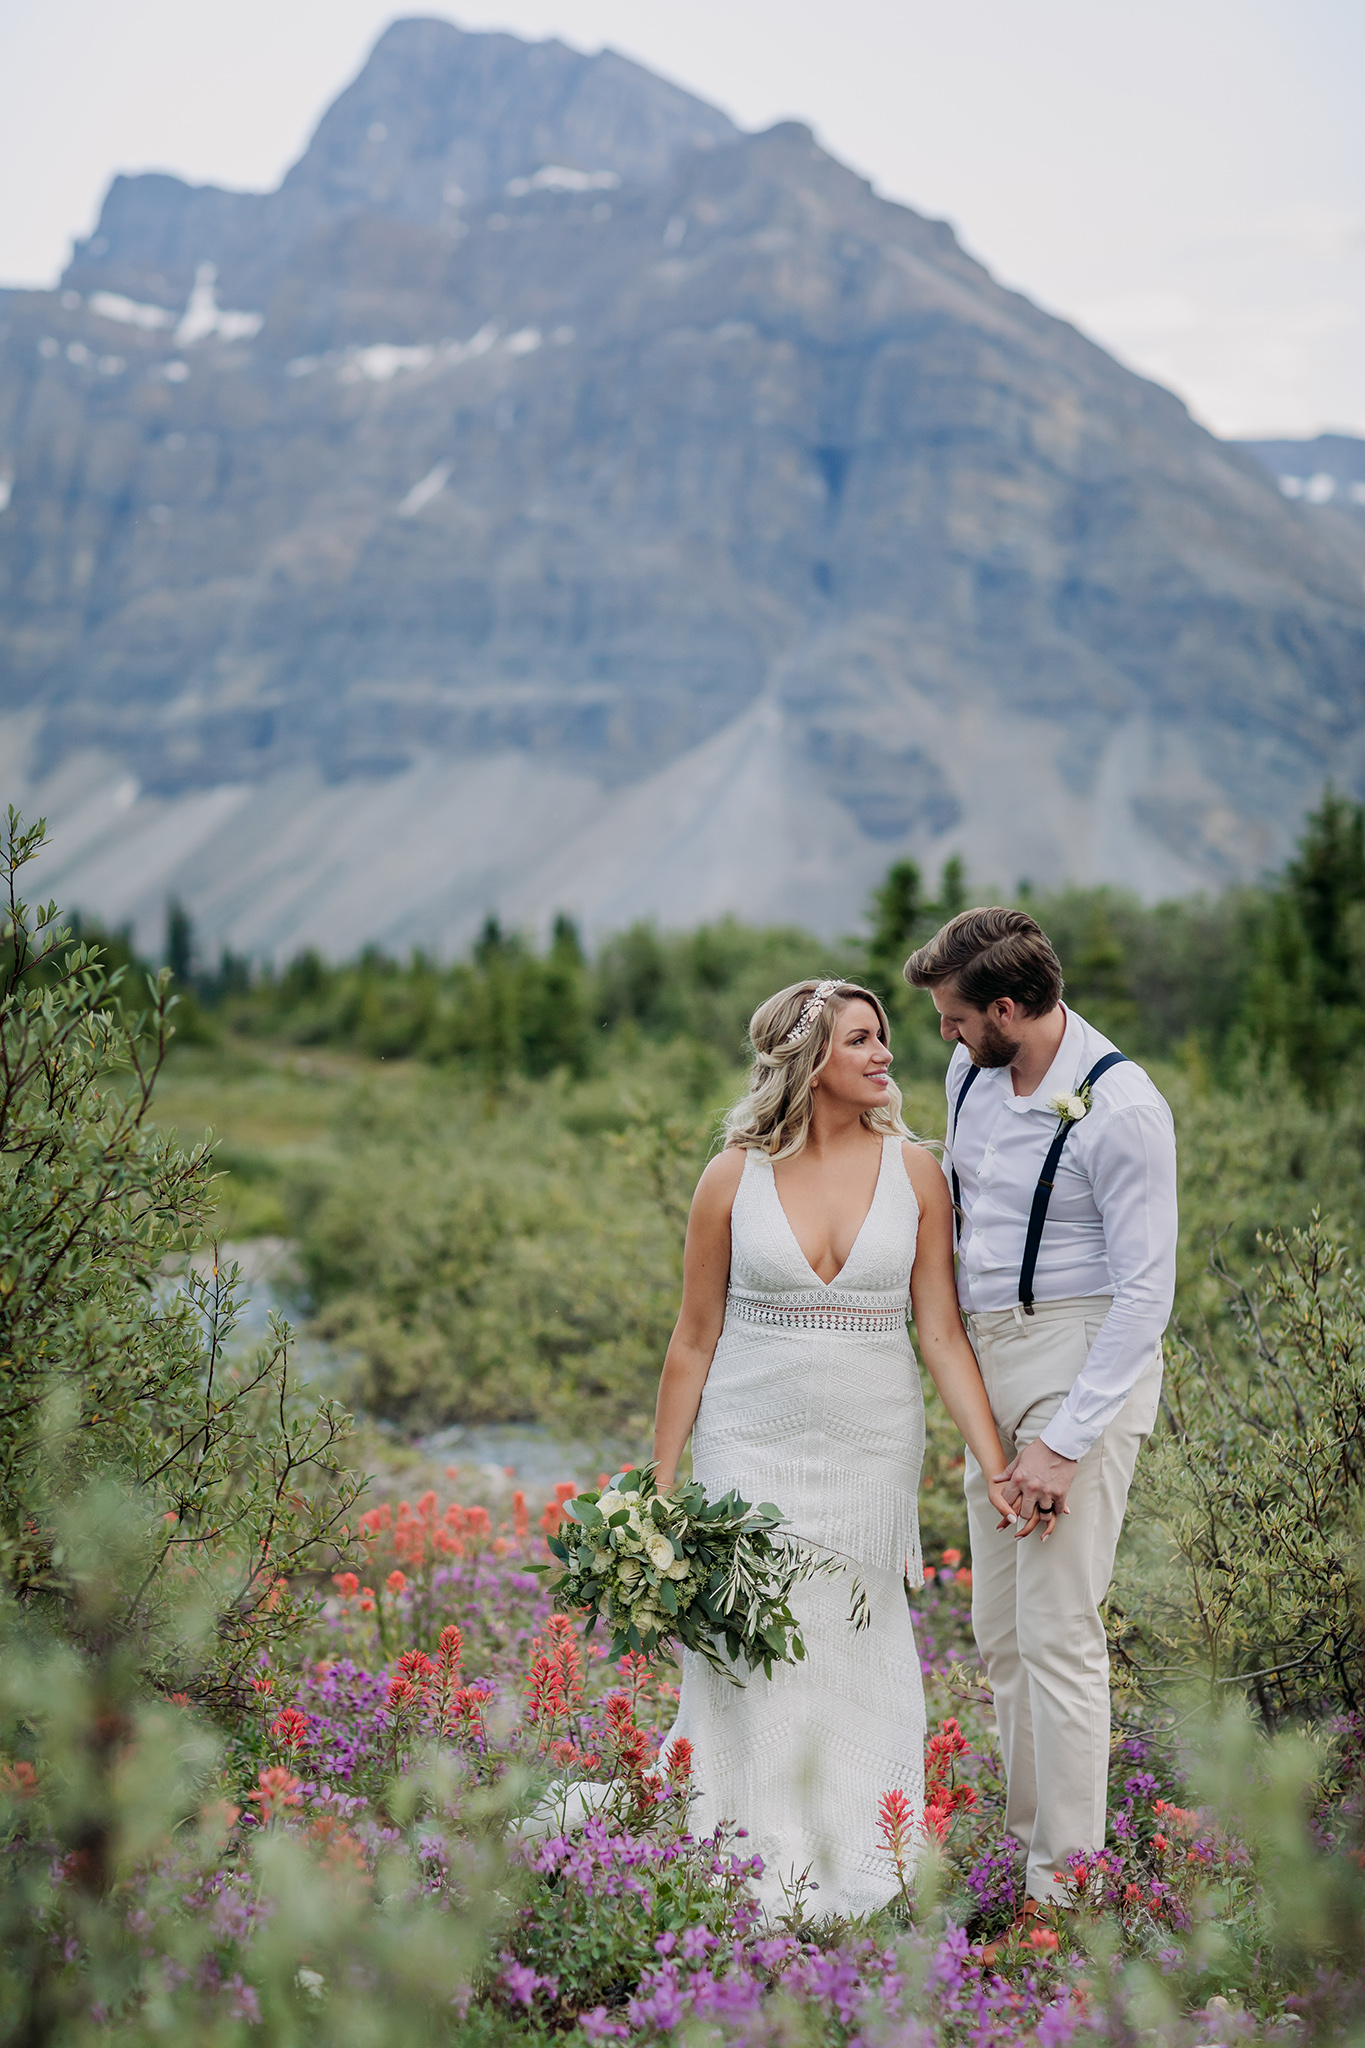 Icefields Parkway elopement in Summer with wildflowers & epic mountain views all around photographed by ENV Photography